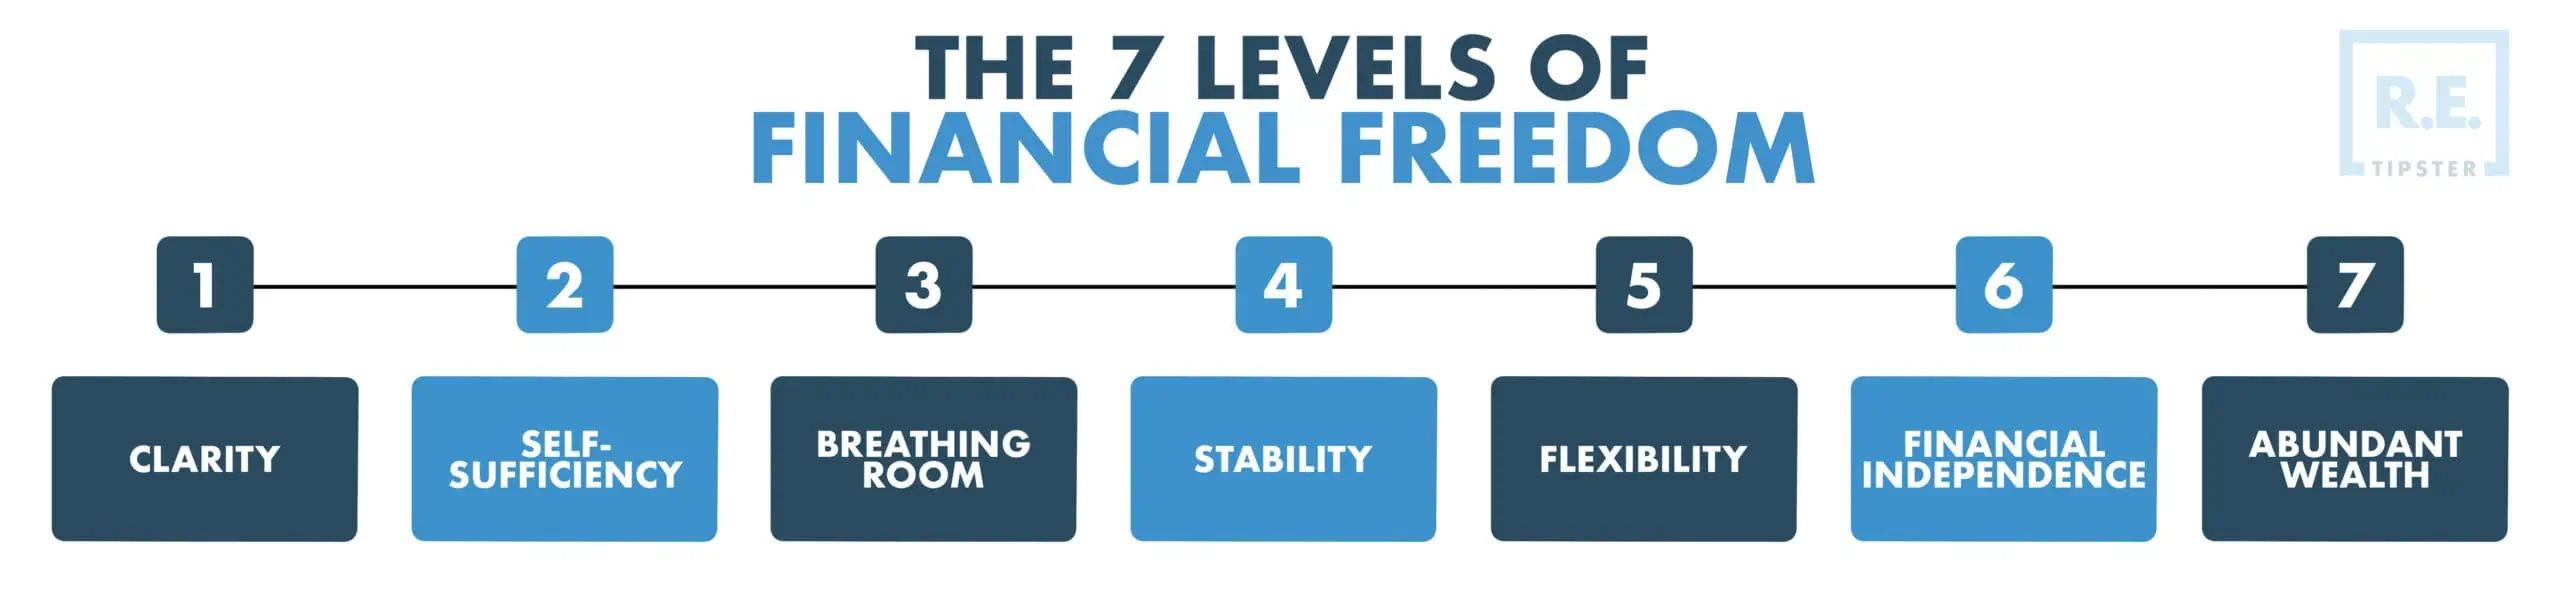 The 7 stages of financial freedom